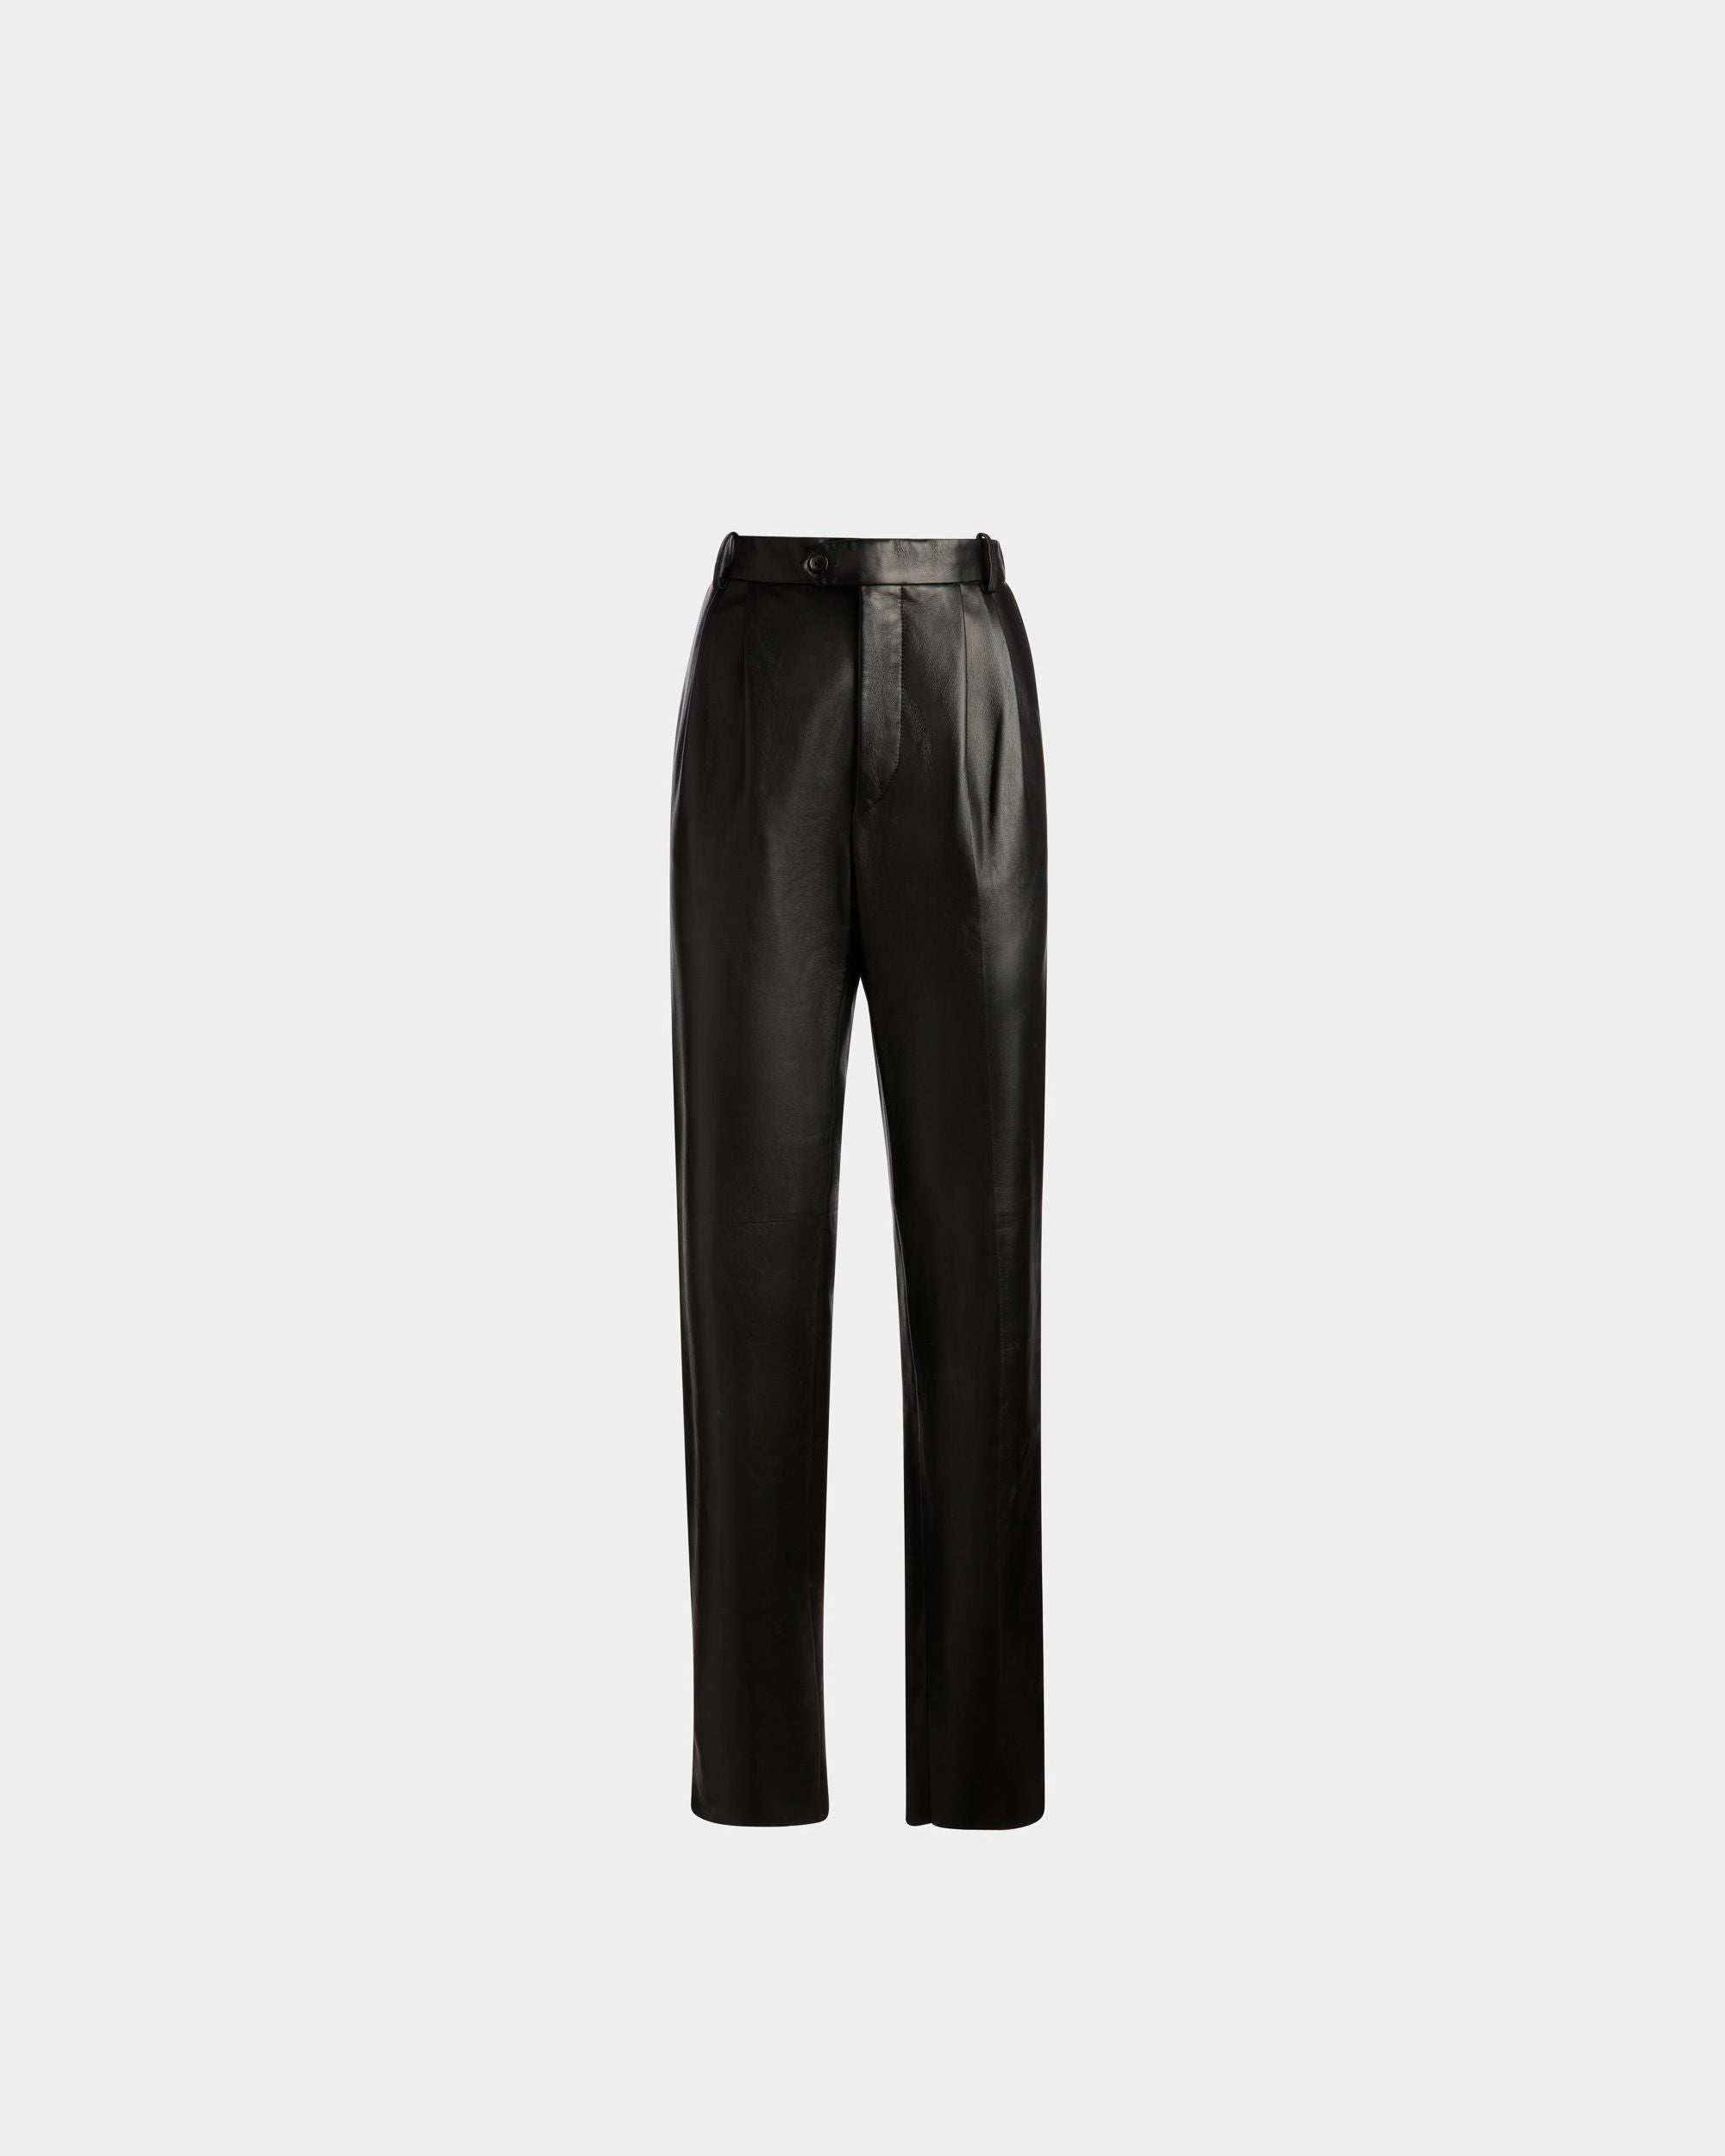 Leather Trousers | Men's Trousers | Black Leather | Bally | Still Life Front